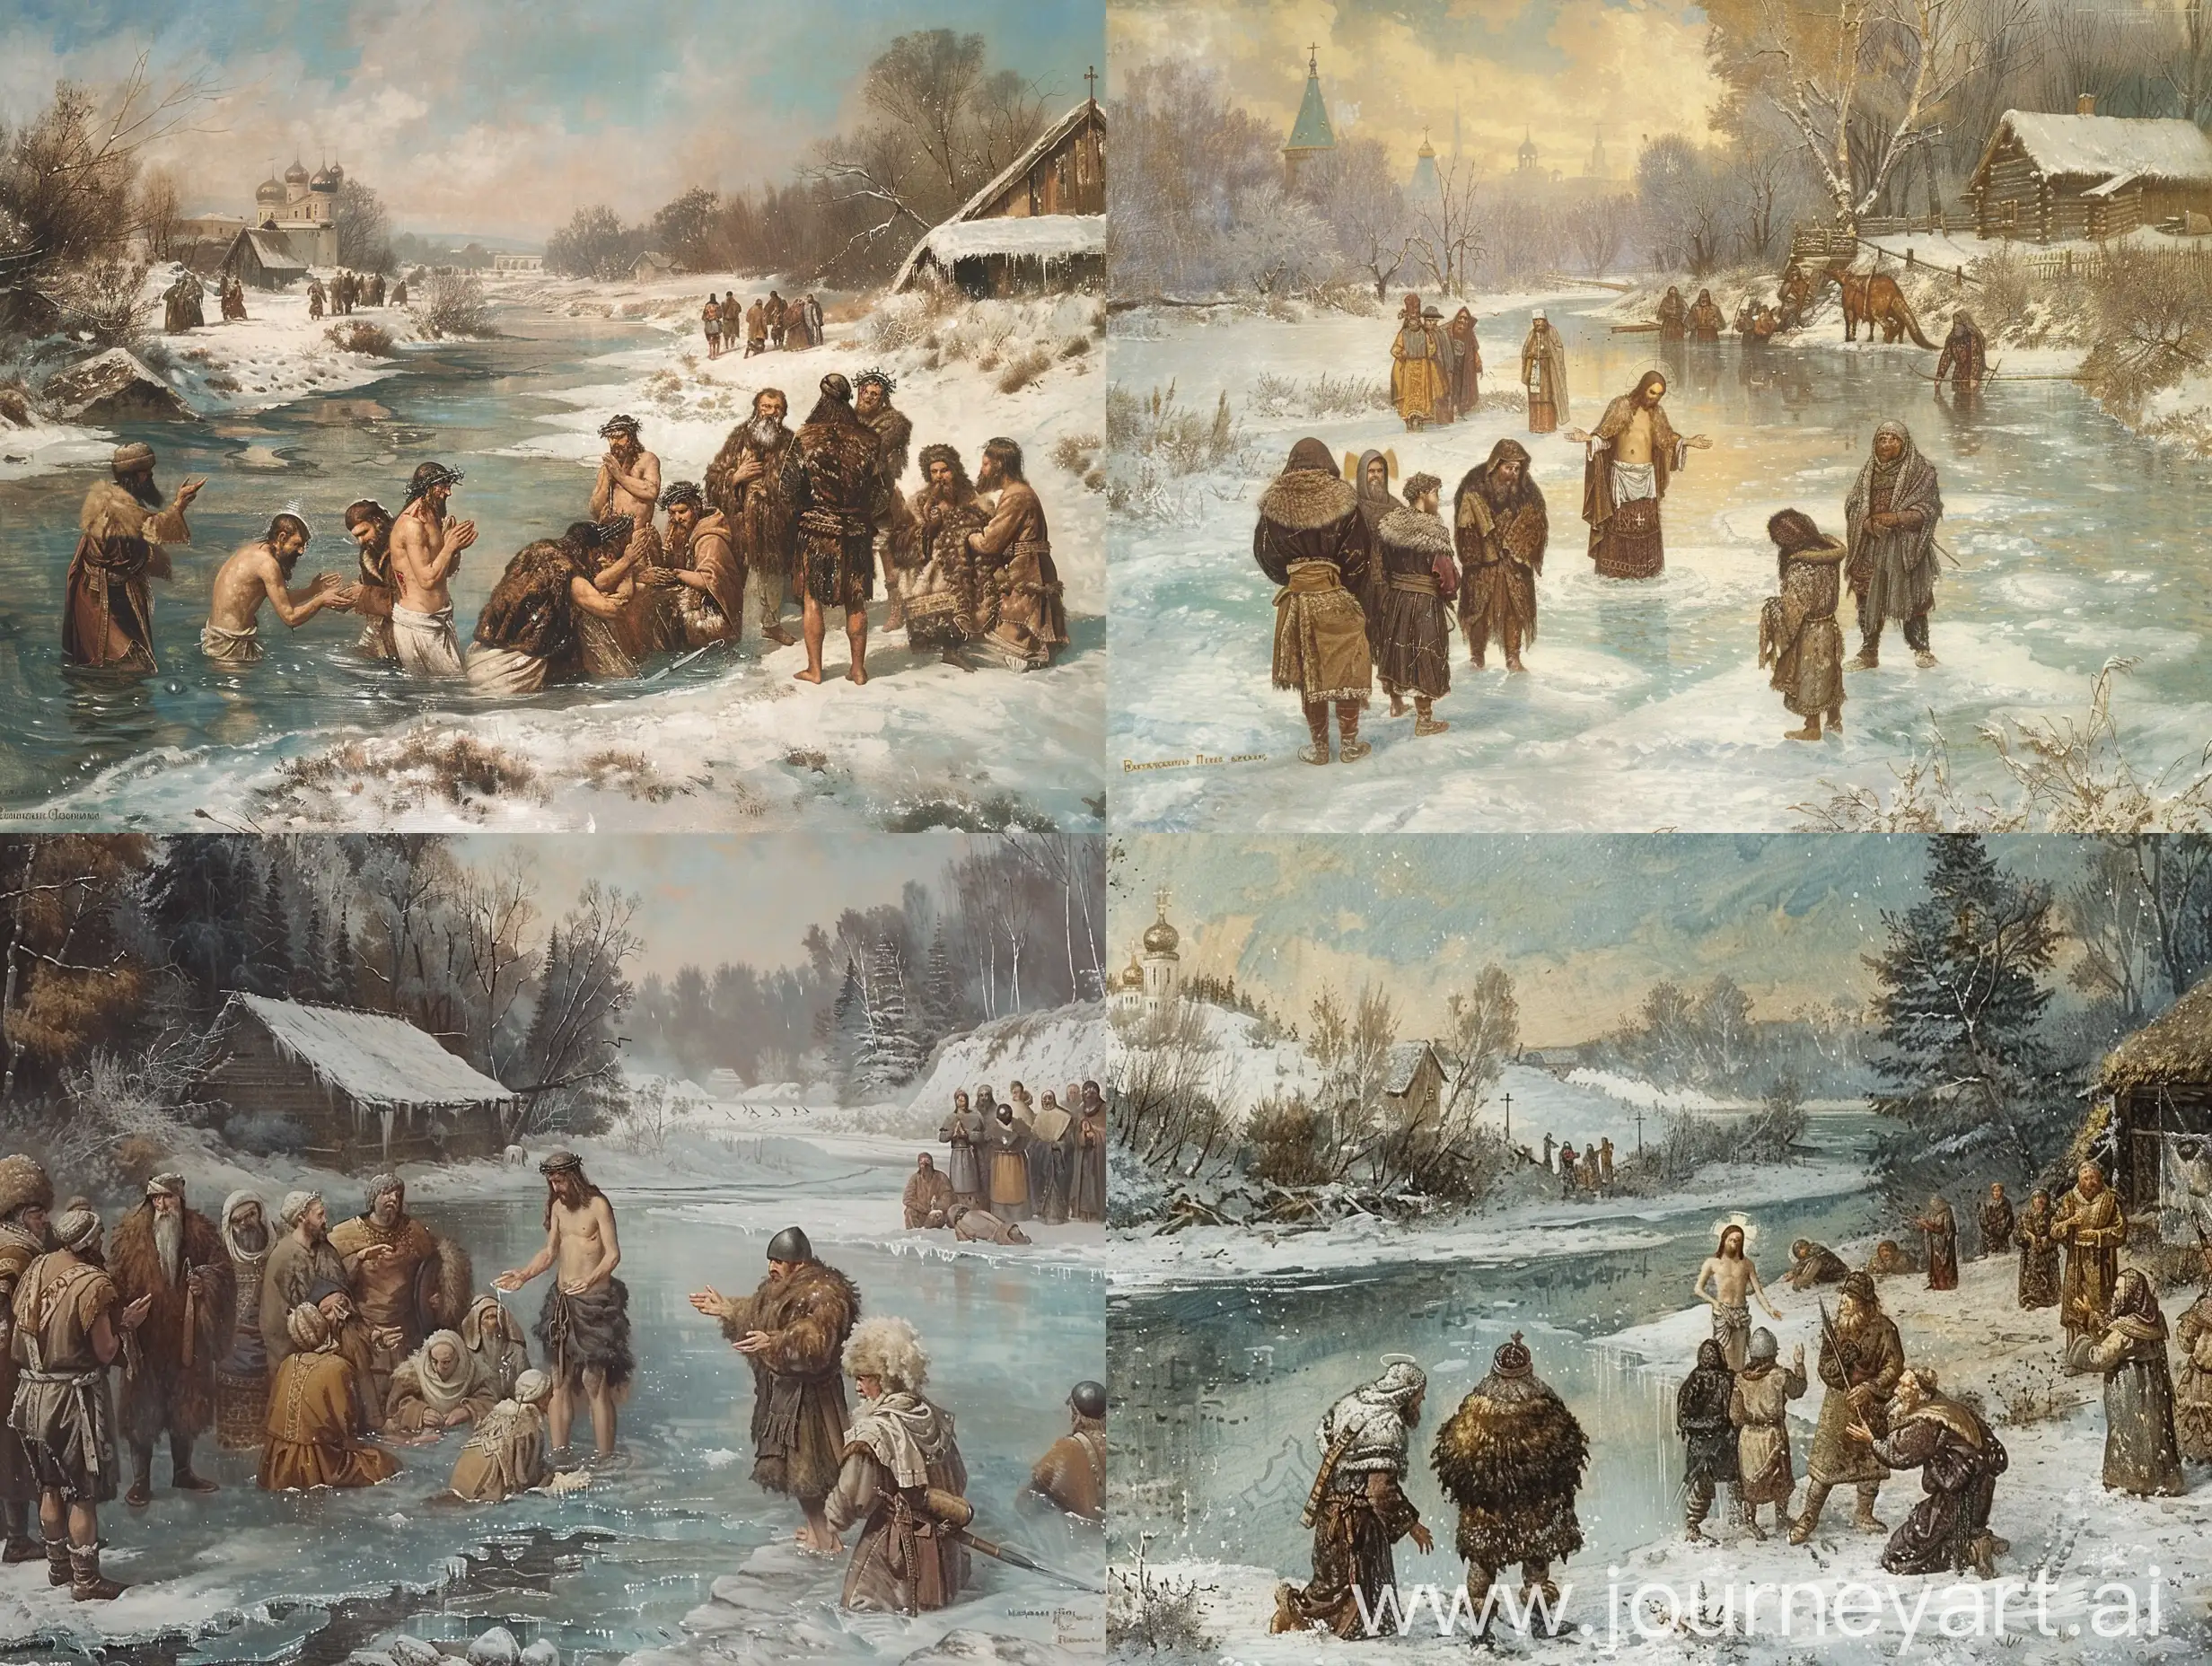 Medieval-Baptism-Ceremony-in-Frozen-Russian-River